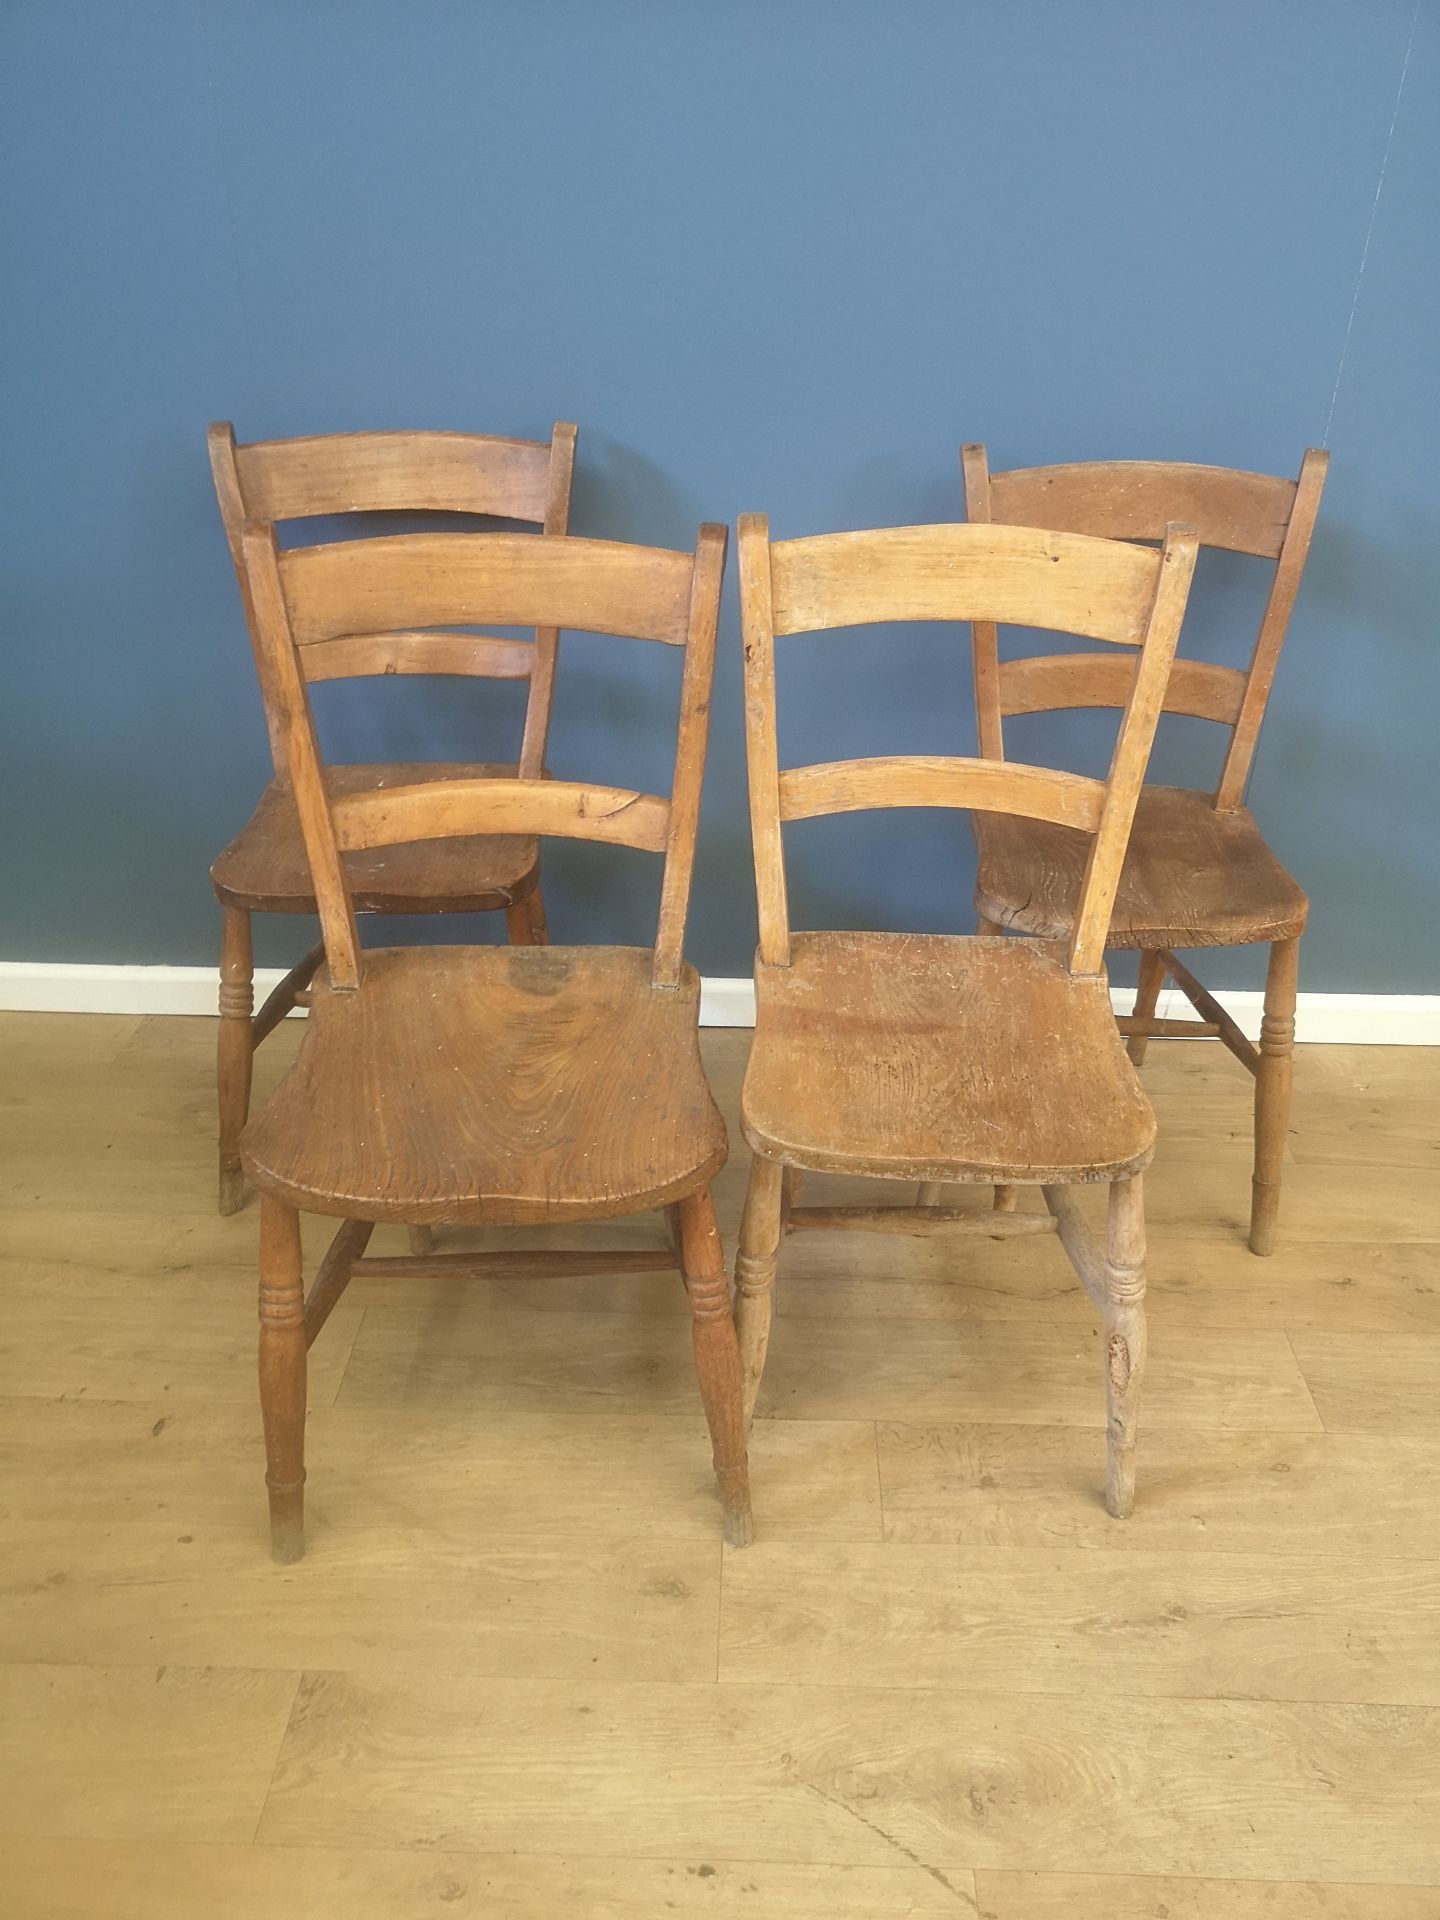 Four unmatched kitchen chairs